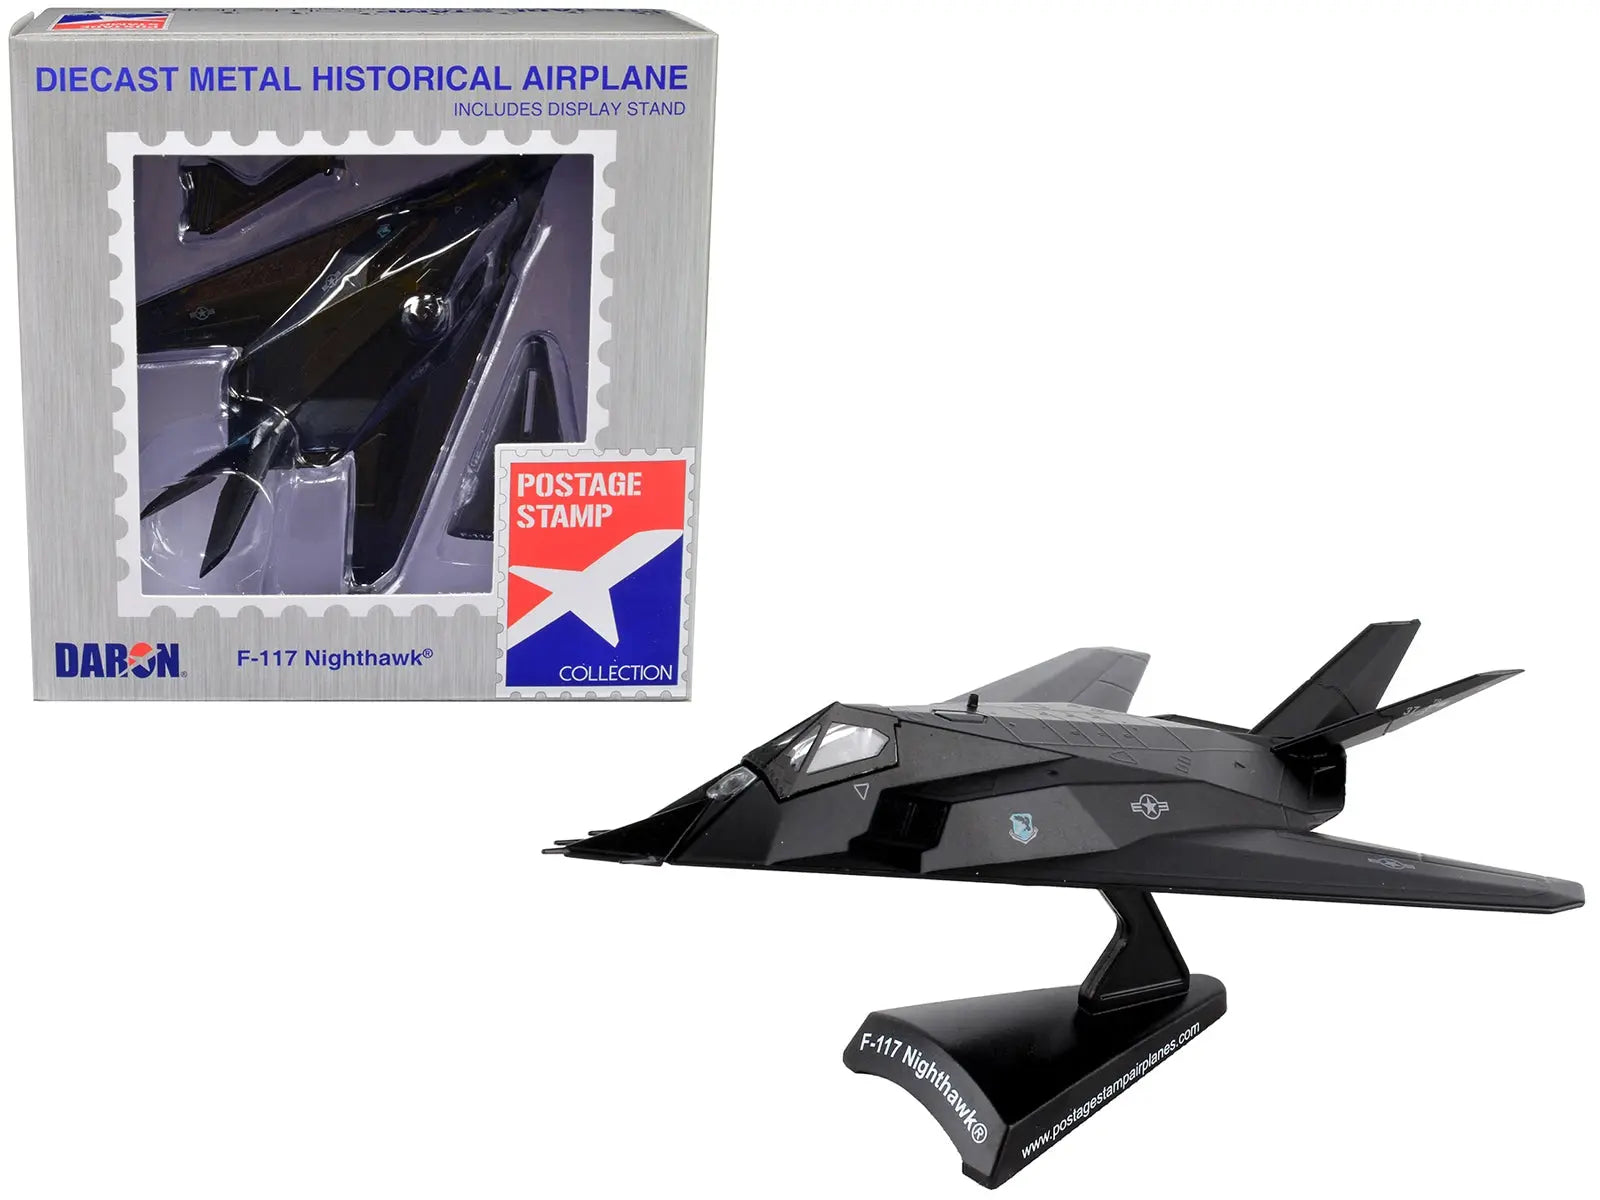 Lockheed F-117 Nighthawk Stealth Aircraft "United States Air Force" 1/150 Diecast Model Airplane by Postage Stamp Postage Stamp